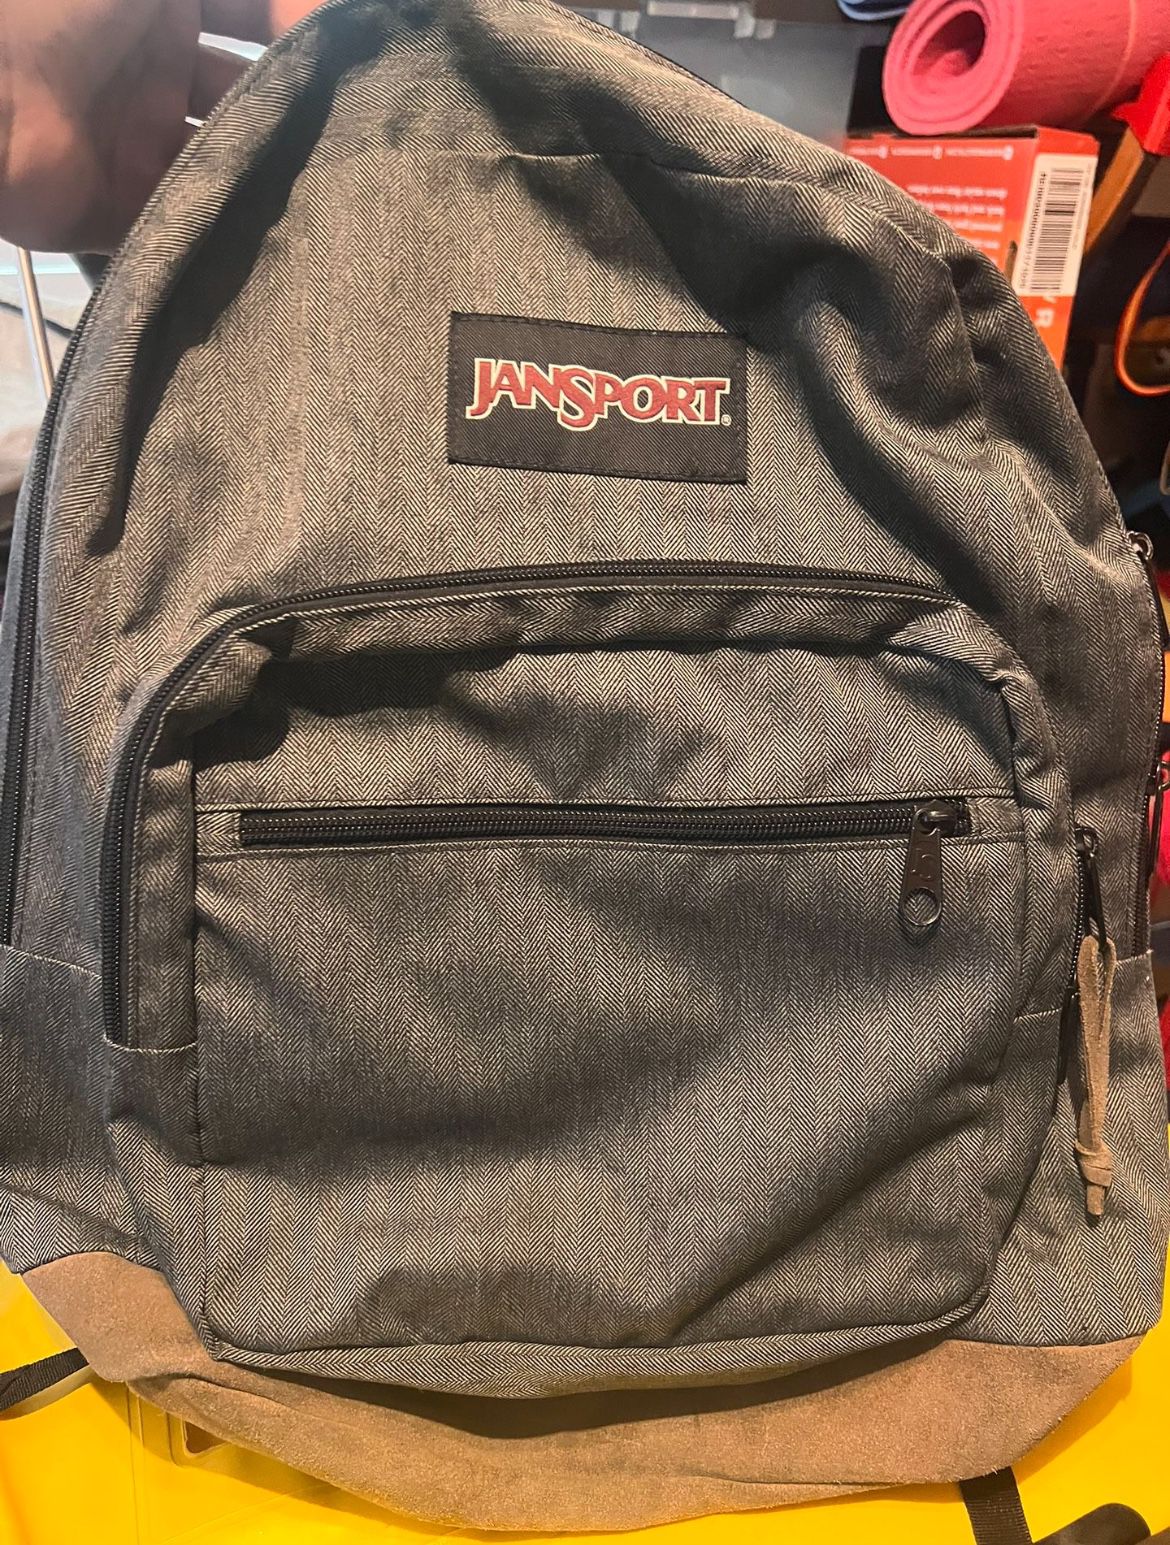 Jansport backpack great condition